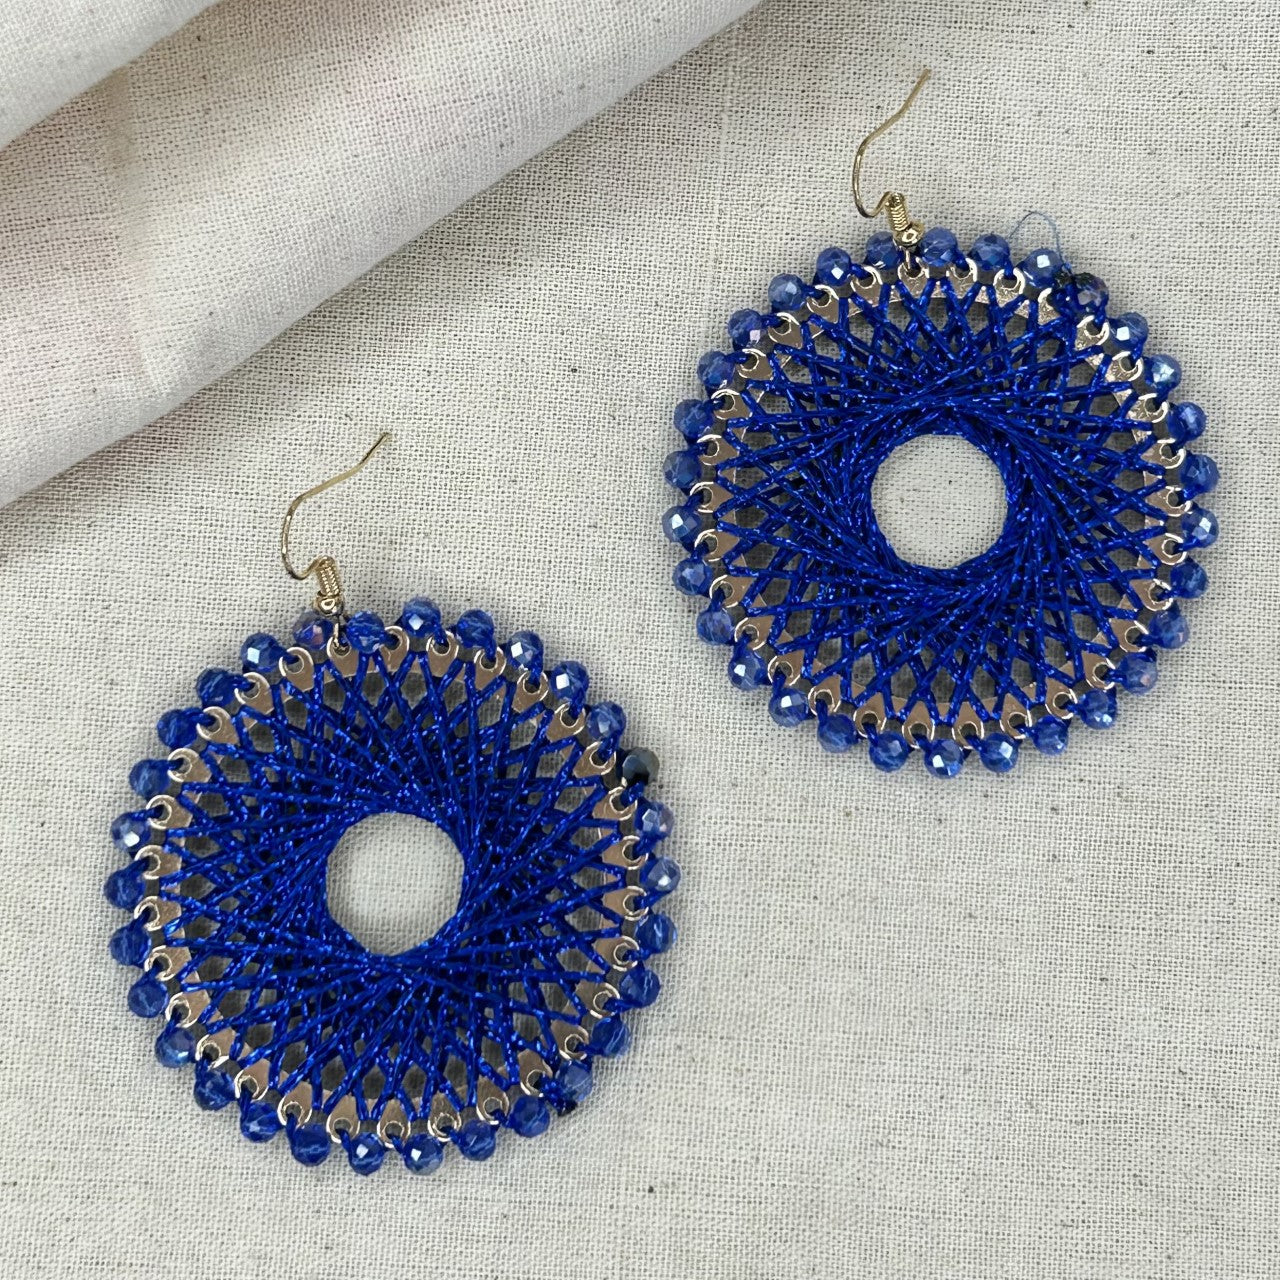 Angelco Accessories Colour burst circle earrings on linen background - cobalt